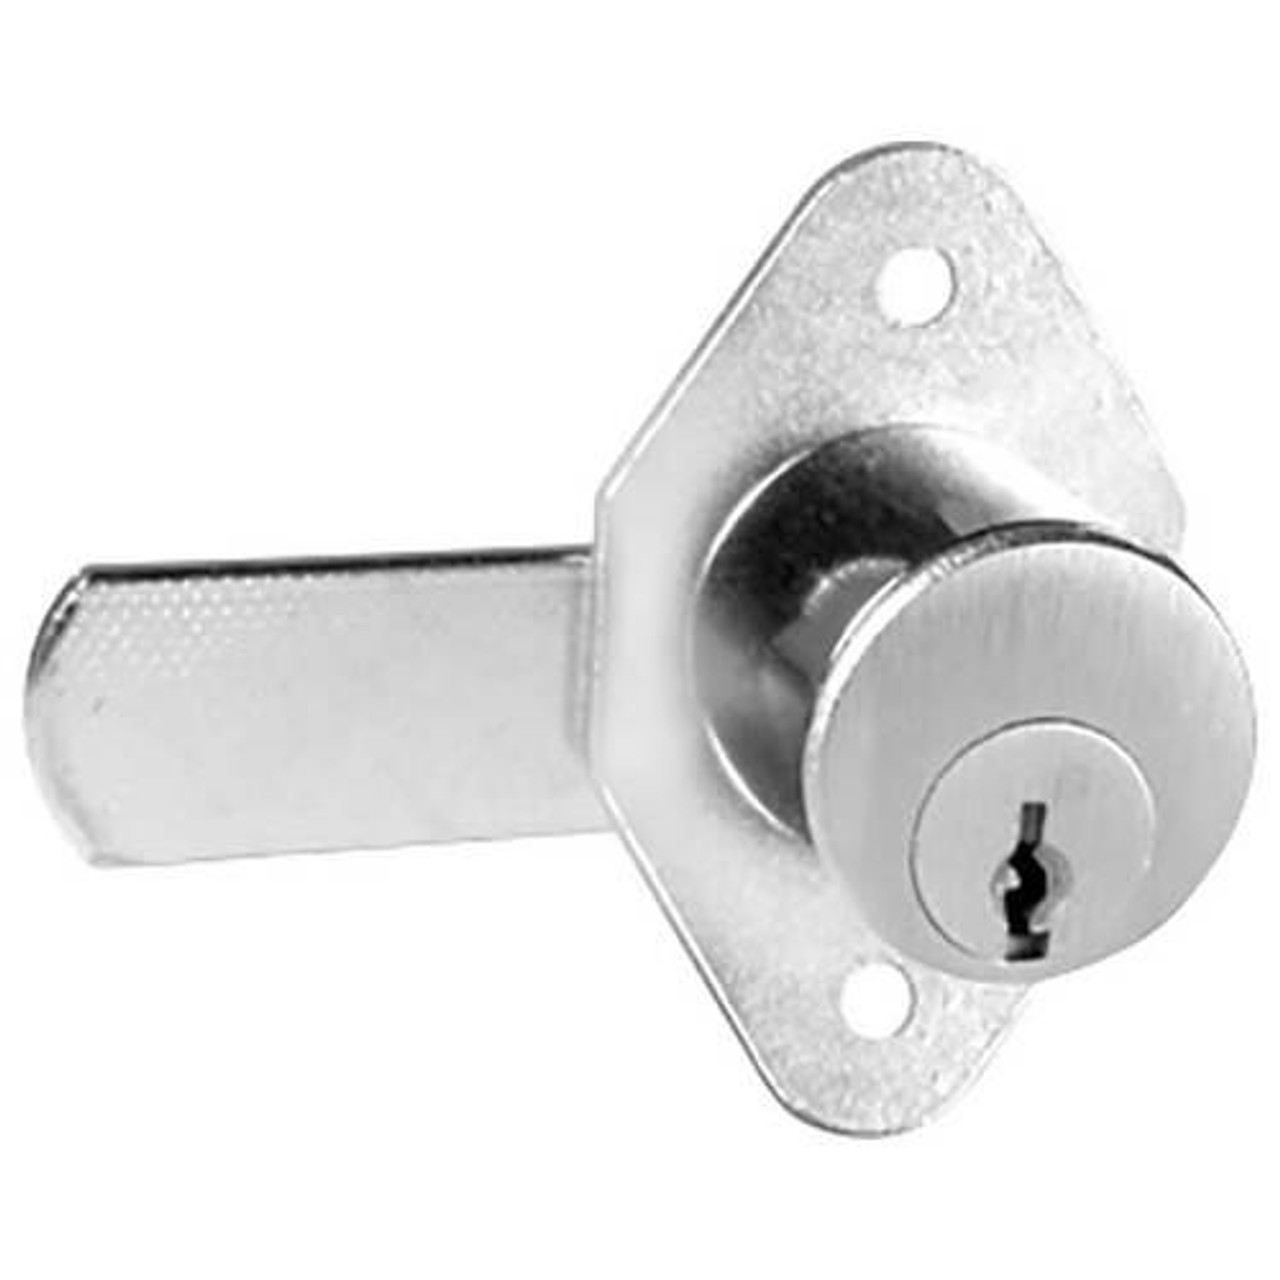 Compx Security Products Compx C8183/8188 Pin Tumbler Door and Drawer Cam Locks 7/8" Cylinder Diameter 1" Cam Length 